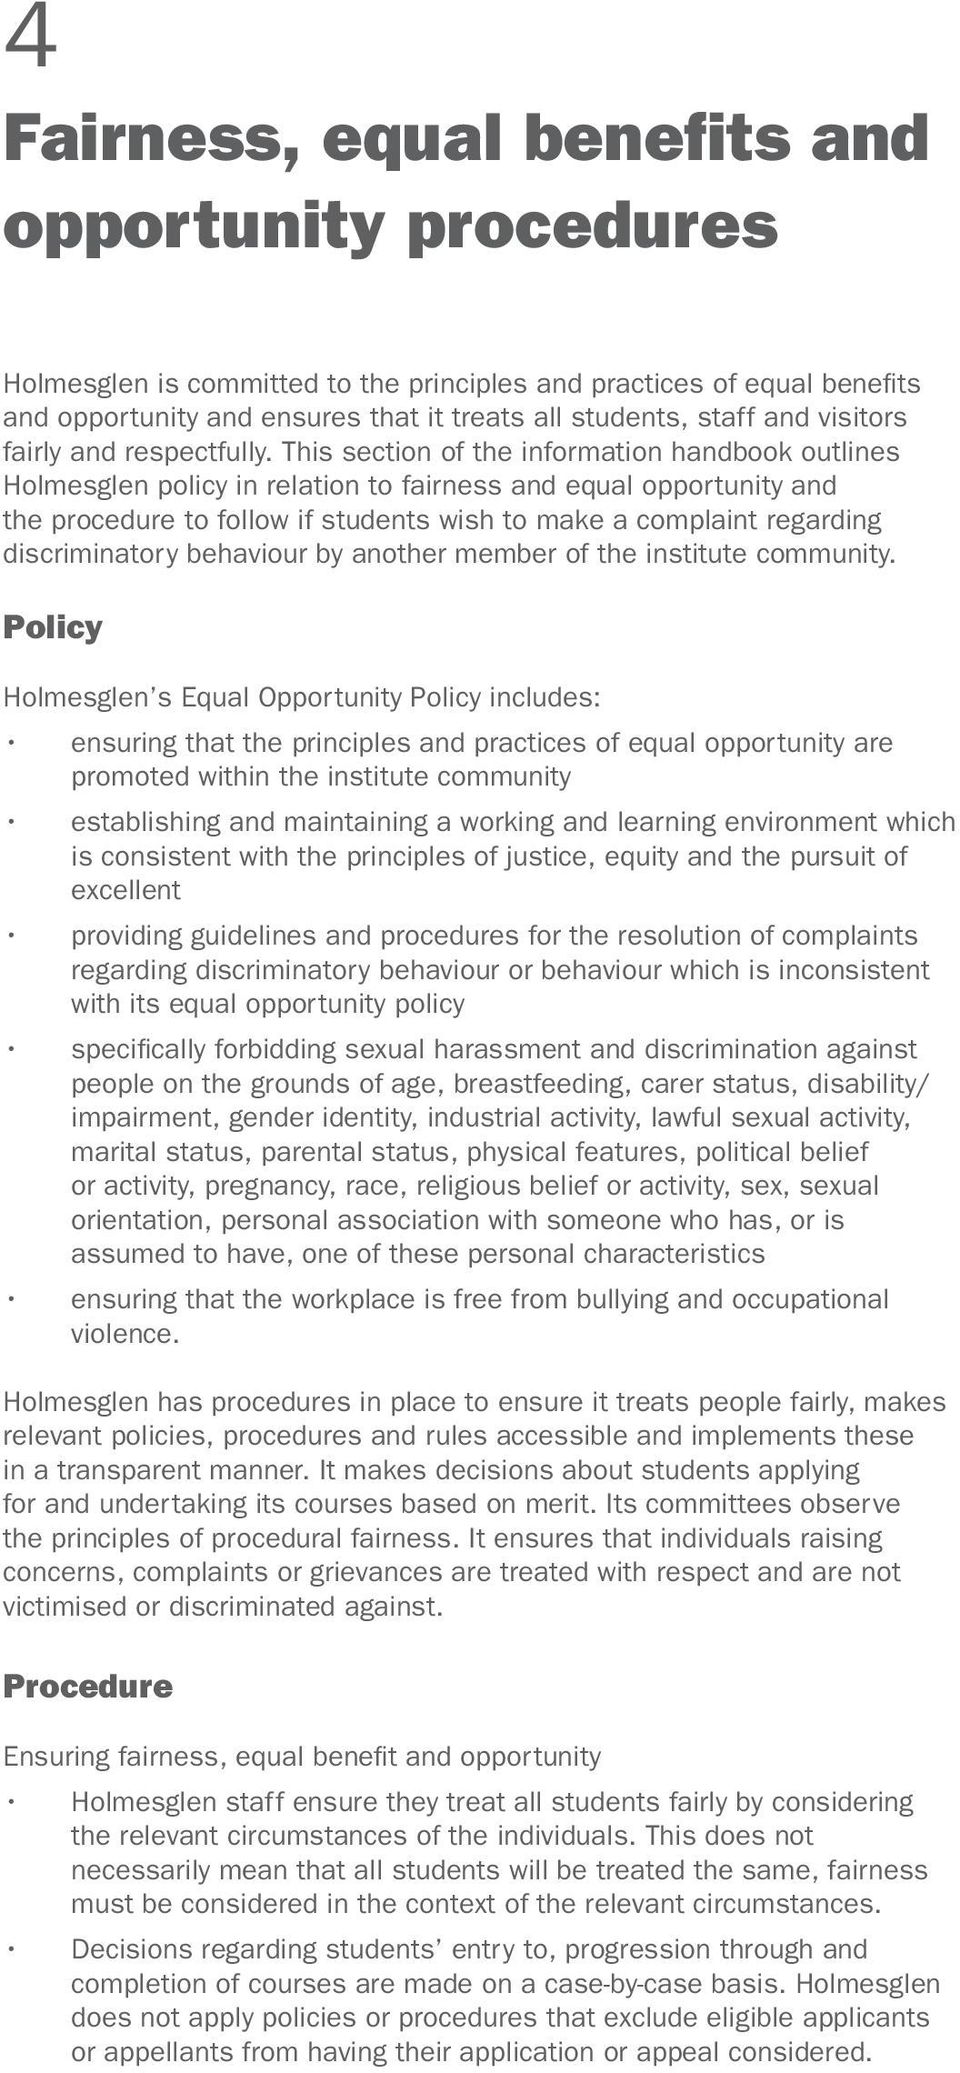 This section of the information handbook outlines Holmesglen policy in relation to fairness and equal opportunity and the procedure to follow if students wish to make a complaint regarding